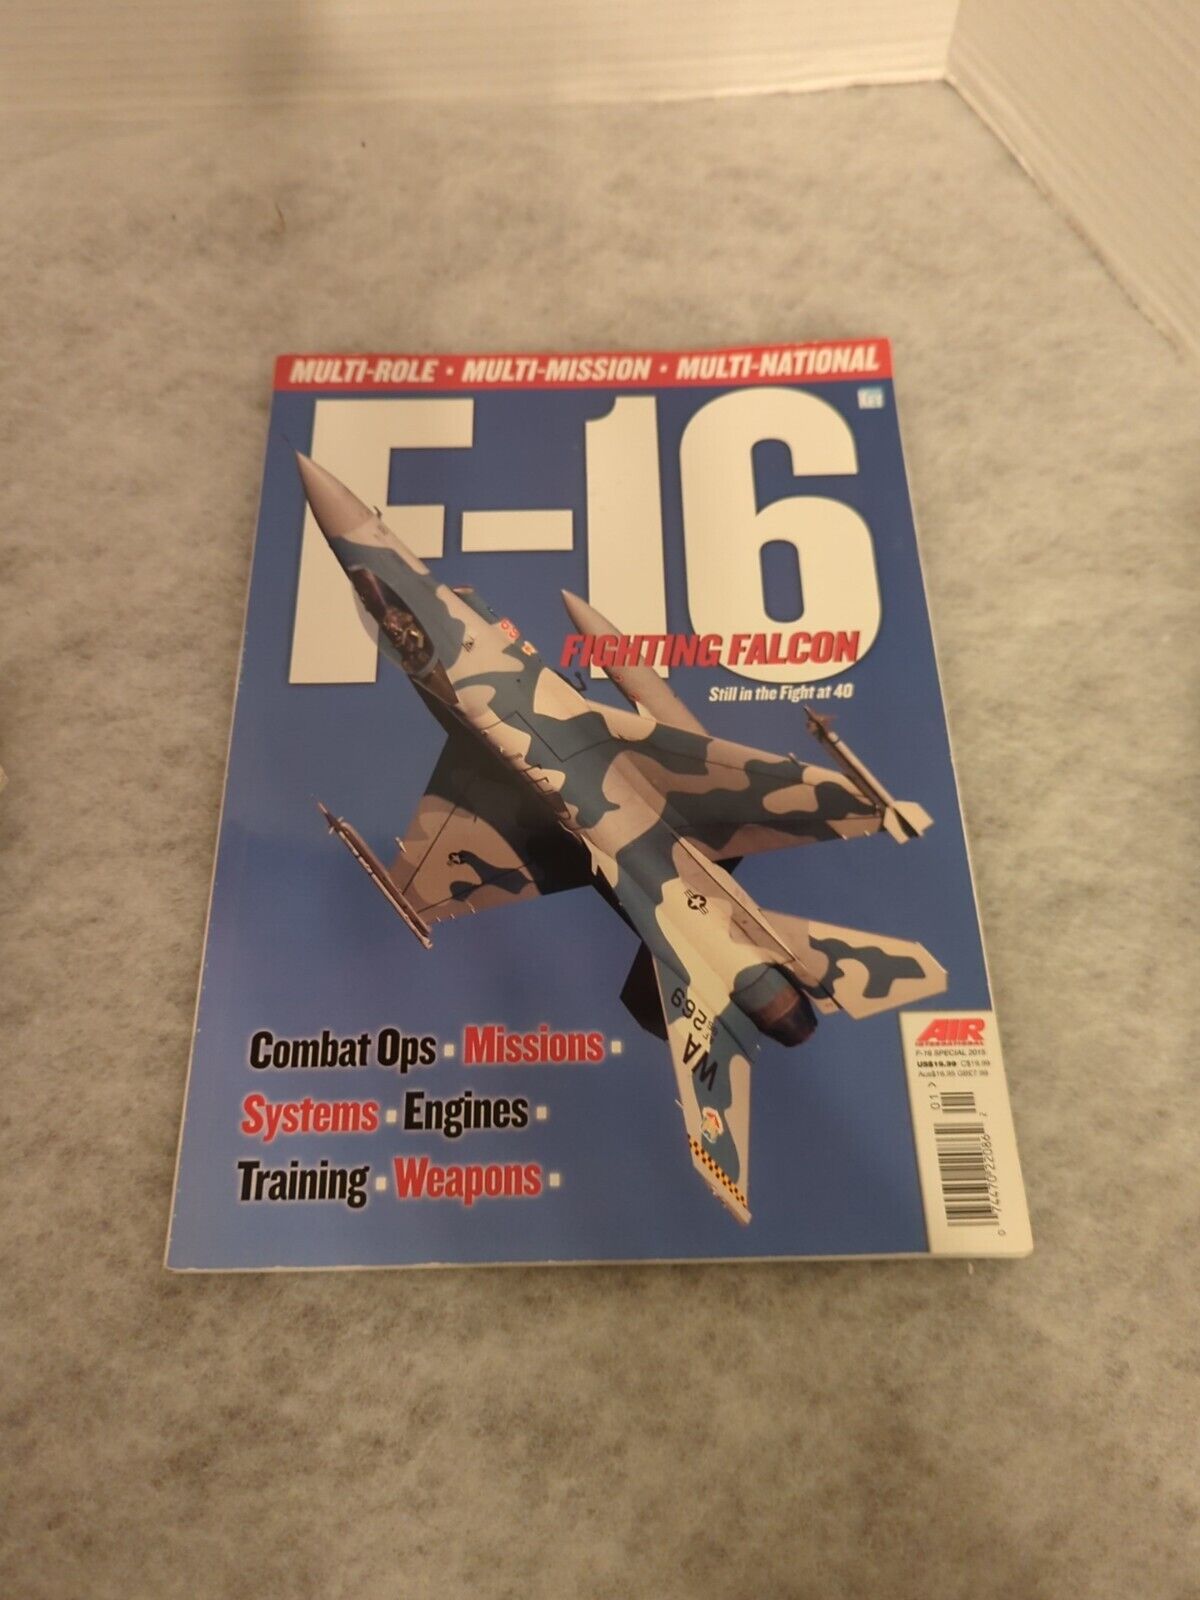 F-16 Fighting Falcon Still in the Fight at 40 (Air International F-16 Special)